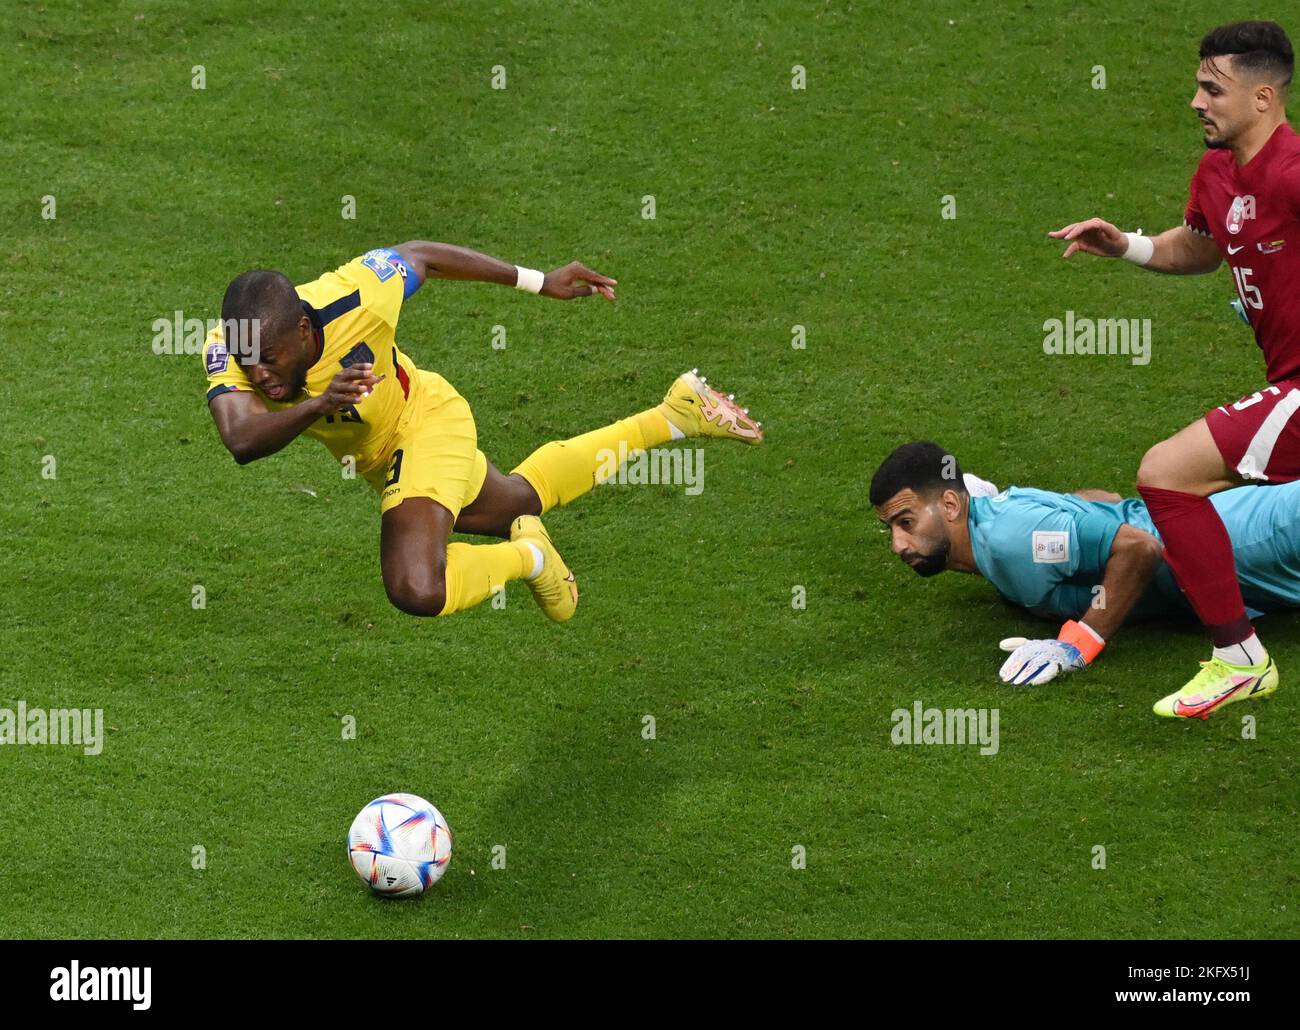 Al Chaur, Qatar. 20th Nov, 2022. Soccer, World Cup 2022 in Qatar, Qatar - Ecuador, Preliminary round, Group A, Matchday 1, Opening match at Al-Bait Stadium, Enner Valencia of Ecuador (l) is fouled in the penalty area by Qatar's goalkeeper Goalkeeper Saad Al Sheeb (M). Valencia scores on the ensuing penalty kick to make it 1-0, with Qatar center back Bassam Al-Rawi running on the right. Credit: Robert Michael/dpa/Alamy Live News Stock Photo